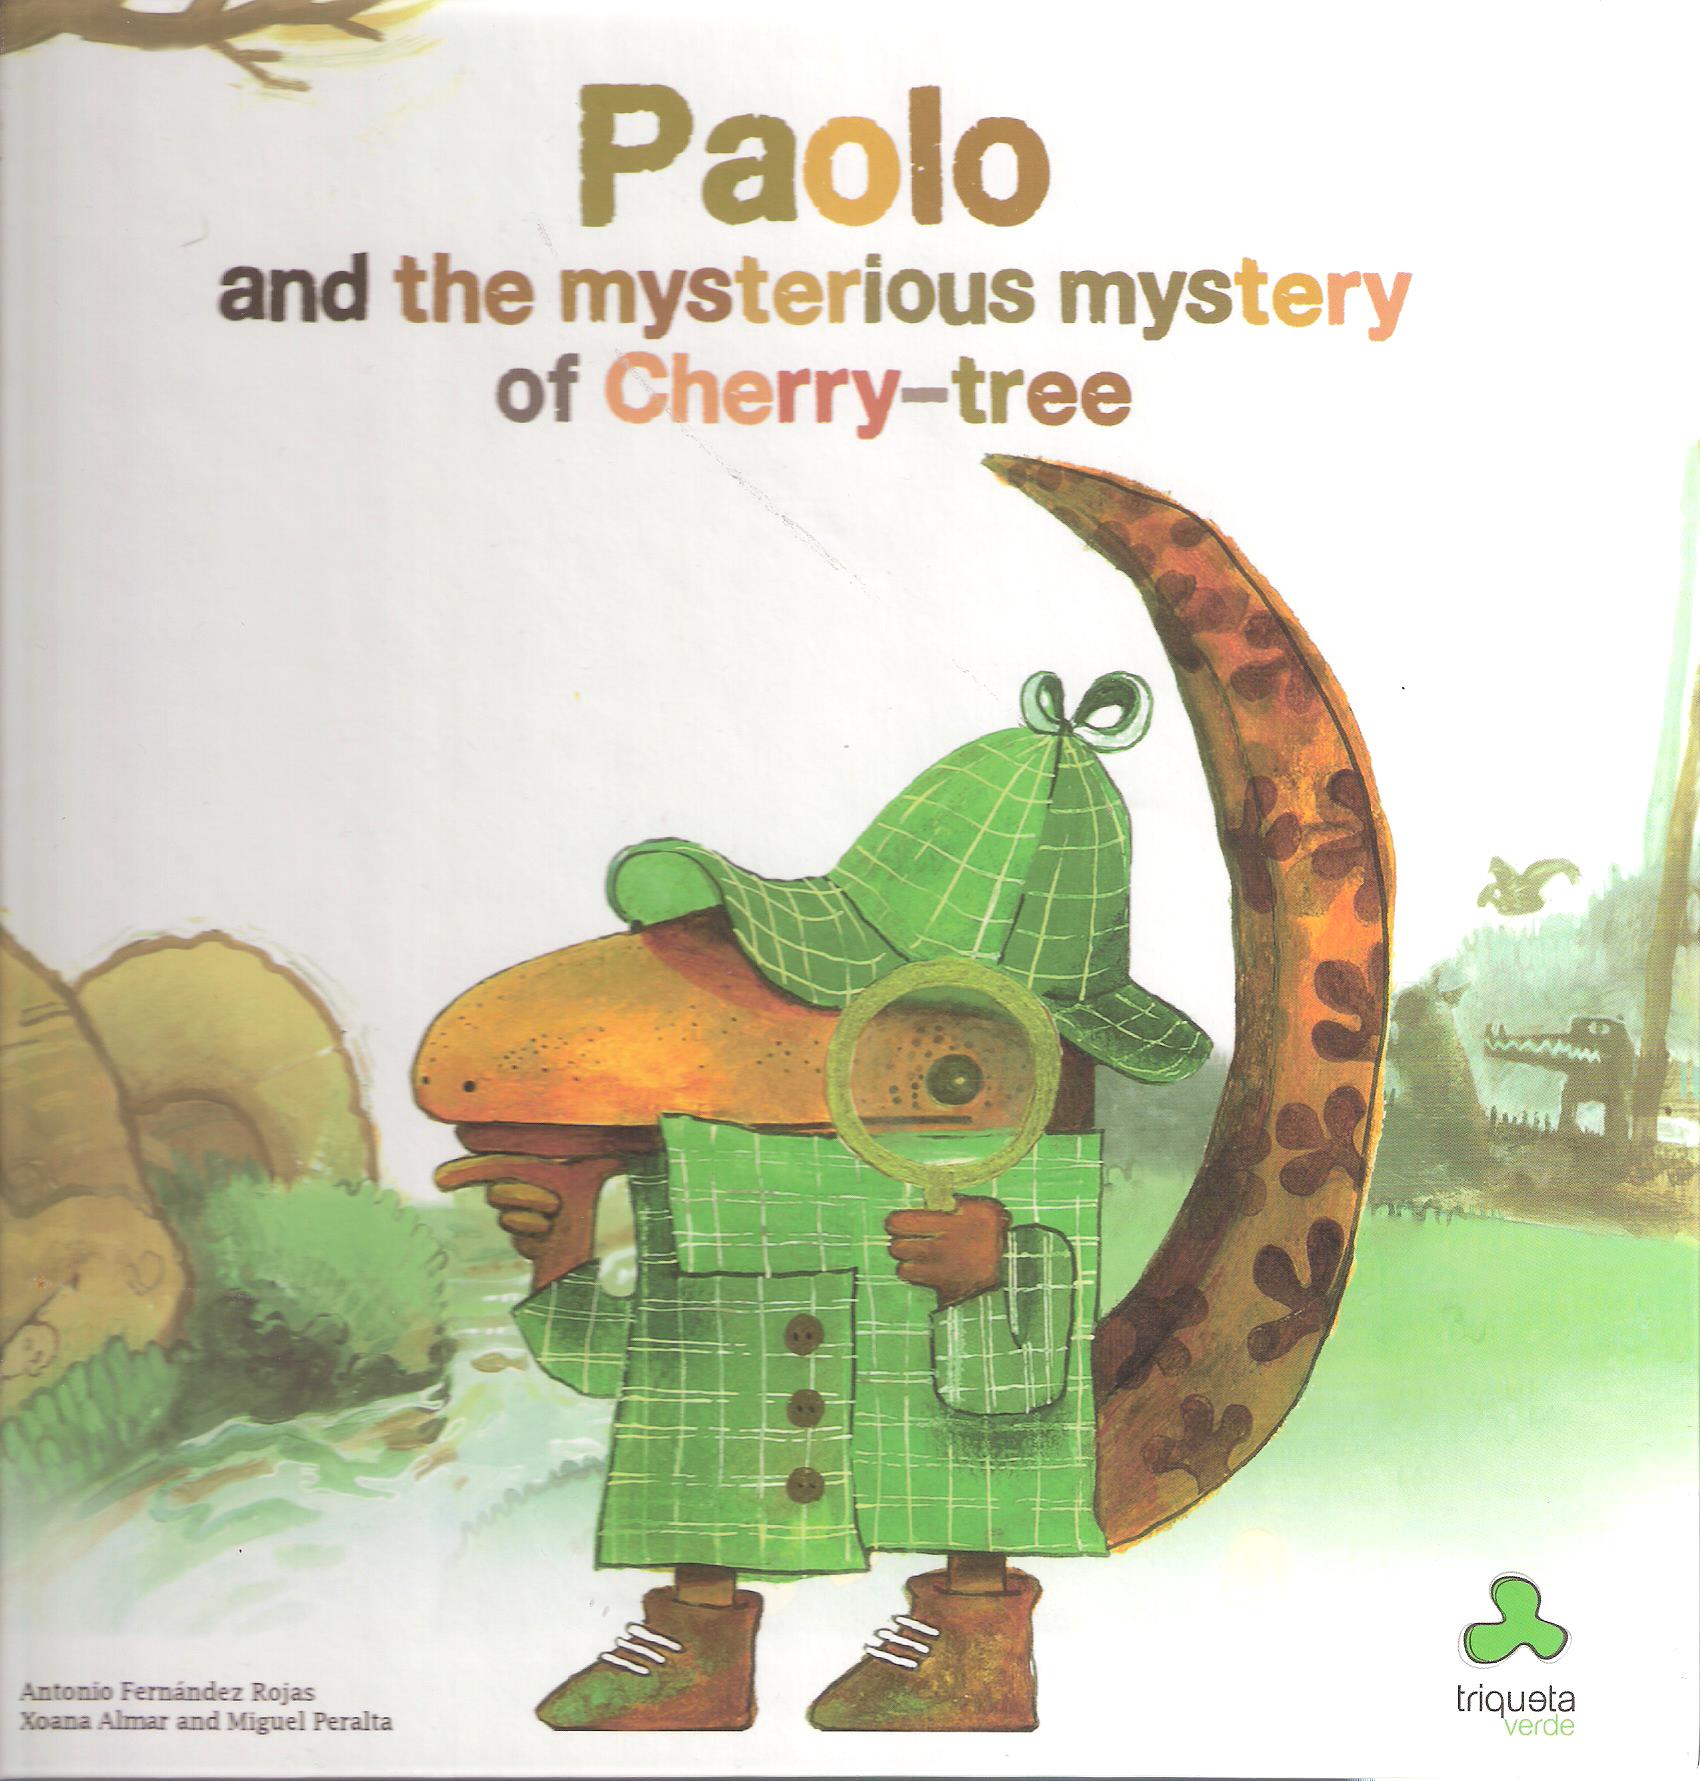 PAOLO AND THE MYSTERIOUS MYSTERY OF CHERRY-TREE